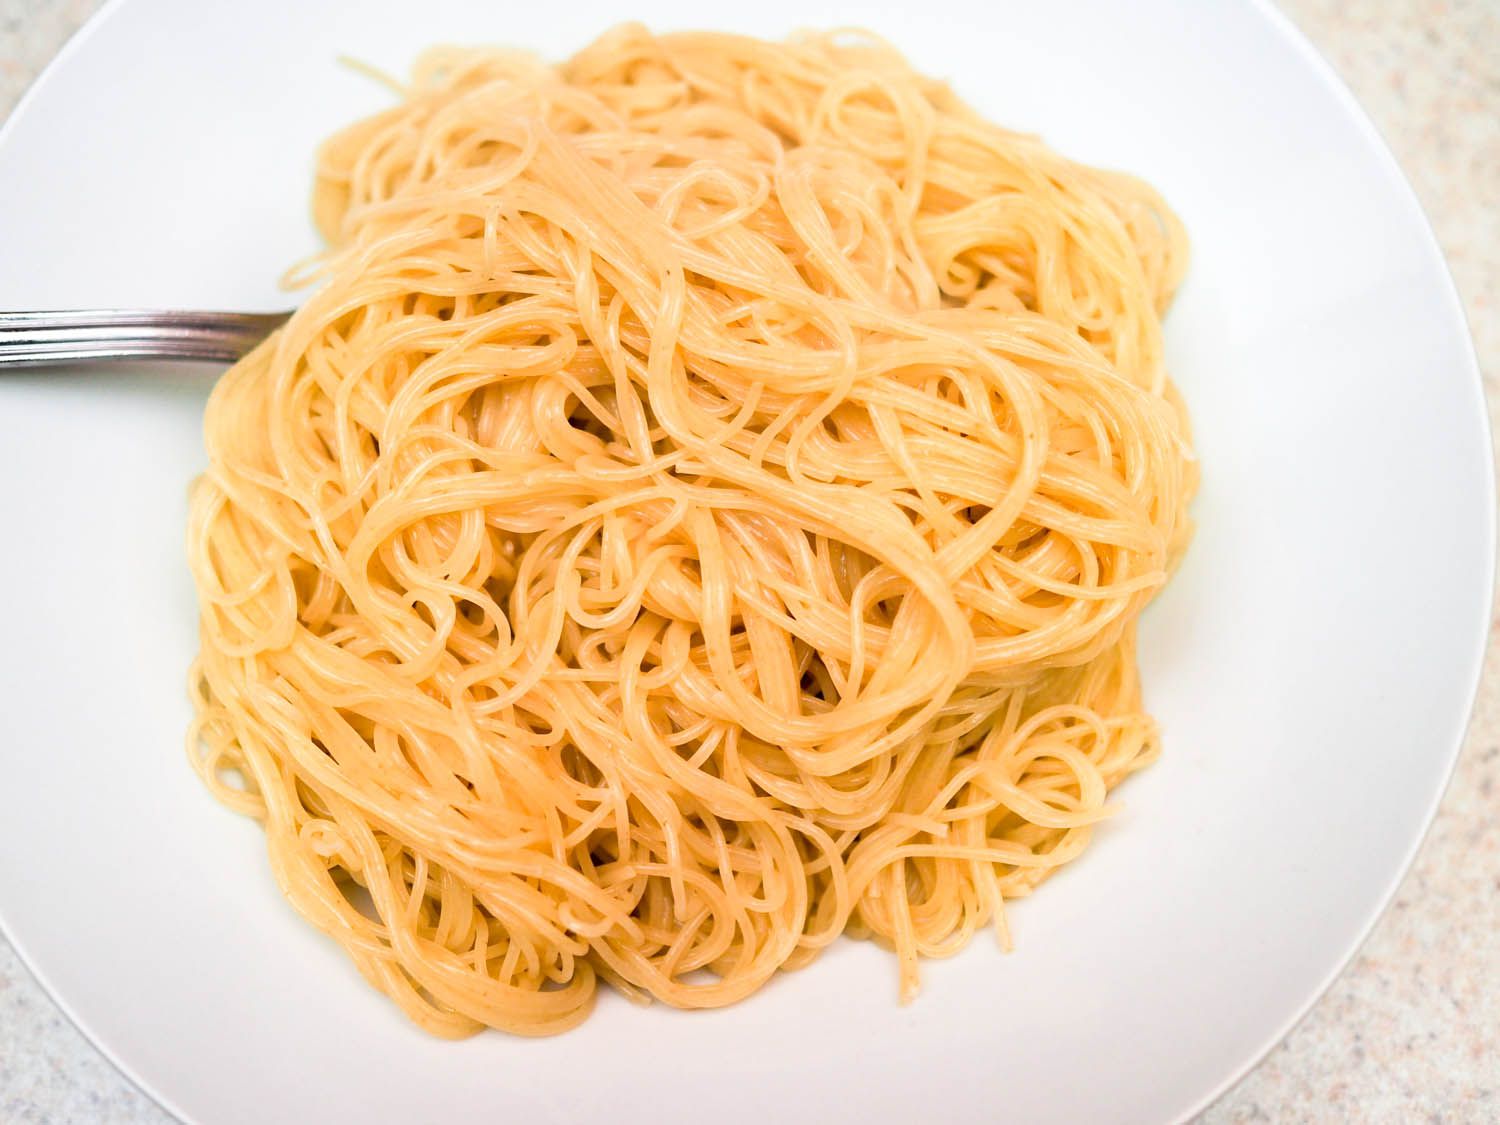 A plate with a pile of angel hair pasta cooked with baking soda.